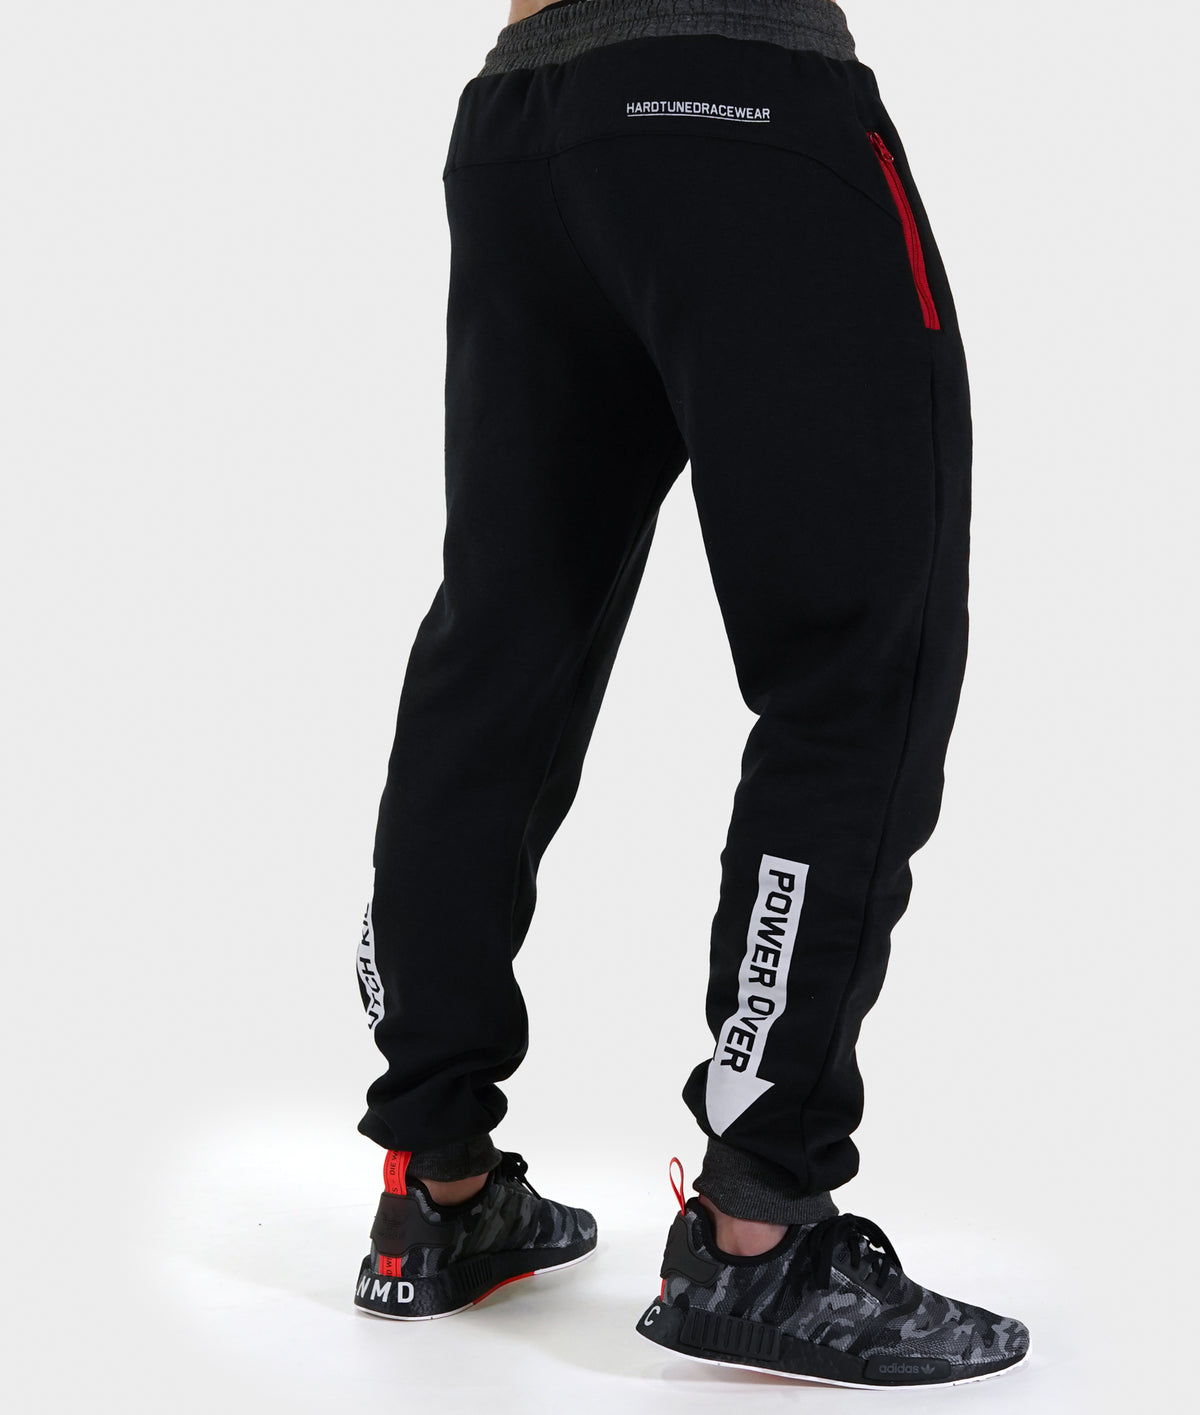 HardTuned – Mens Power Over Track Pants – Black – JDM Clothing Store